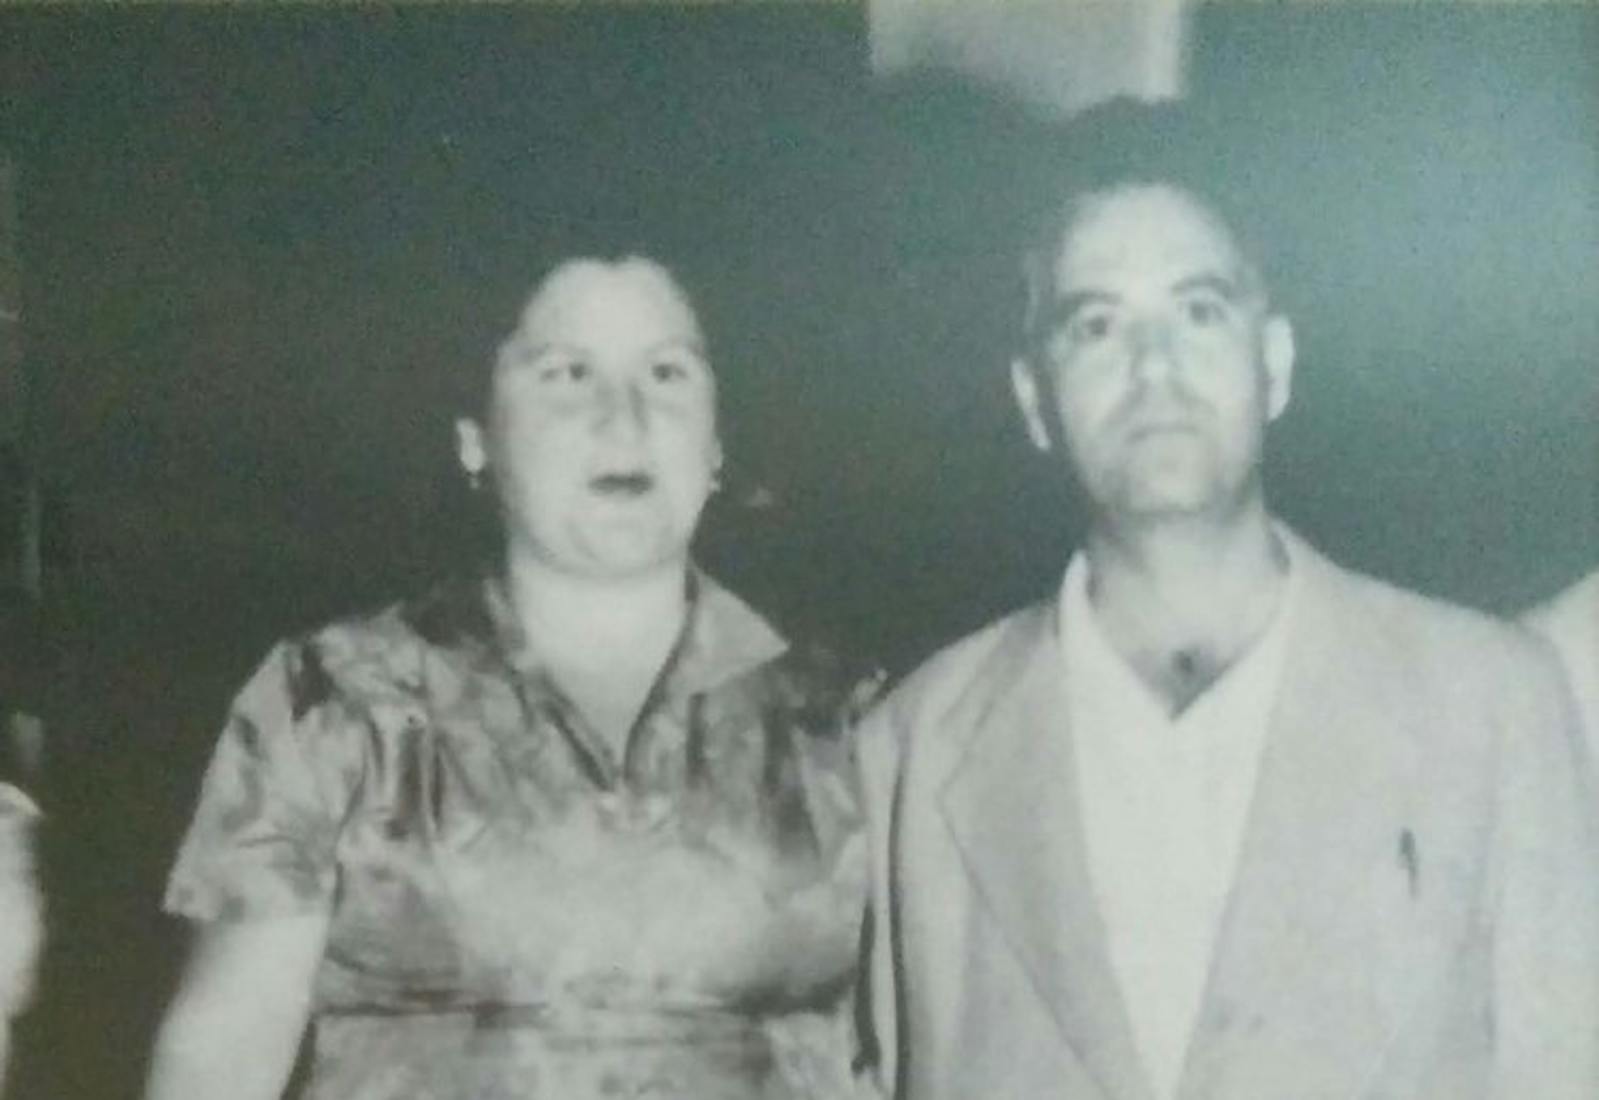 Nitza’s parents, Maloo and Shimon, in Israel, 1950.